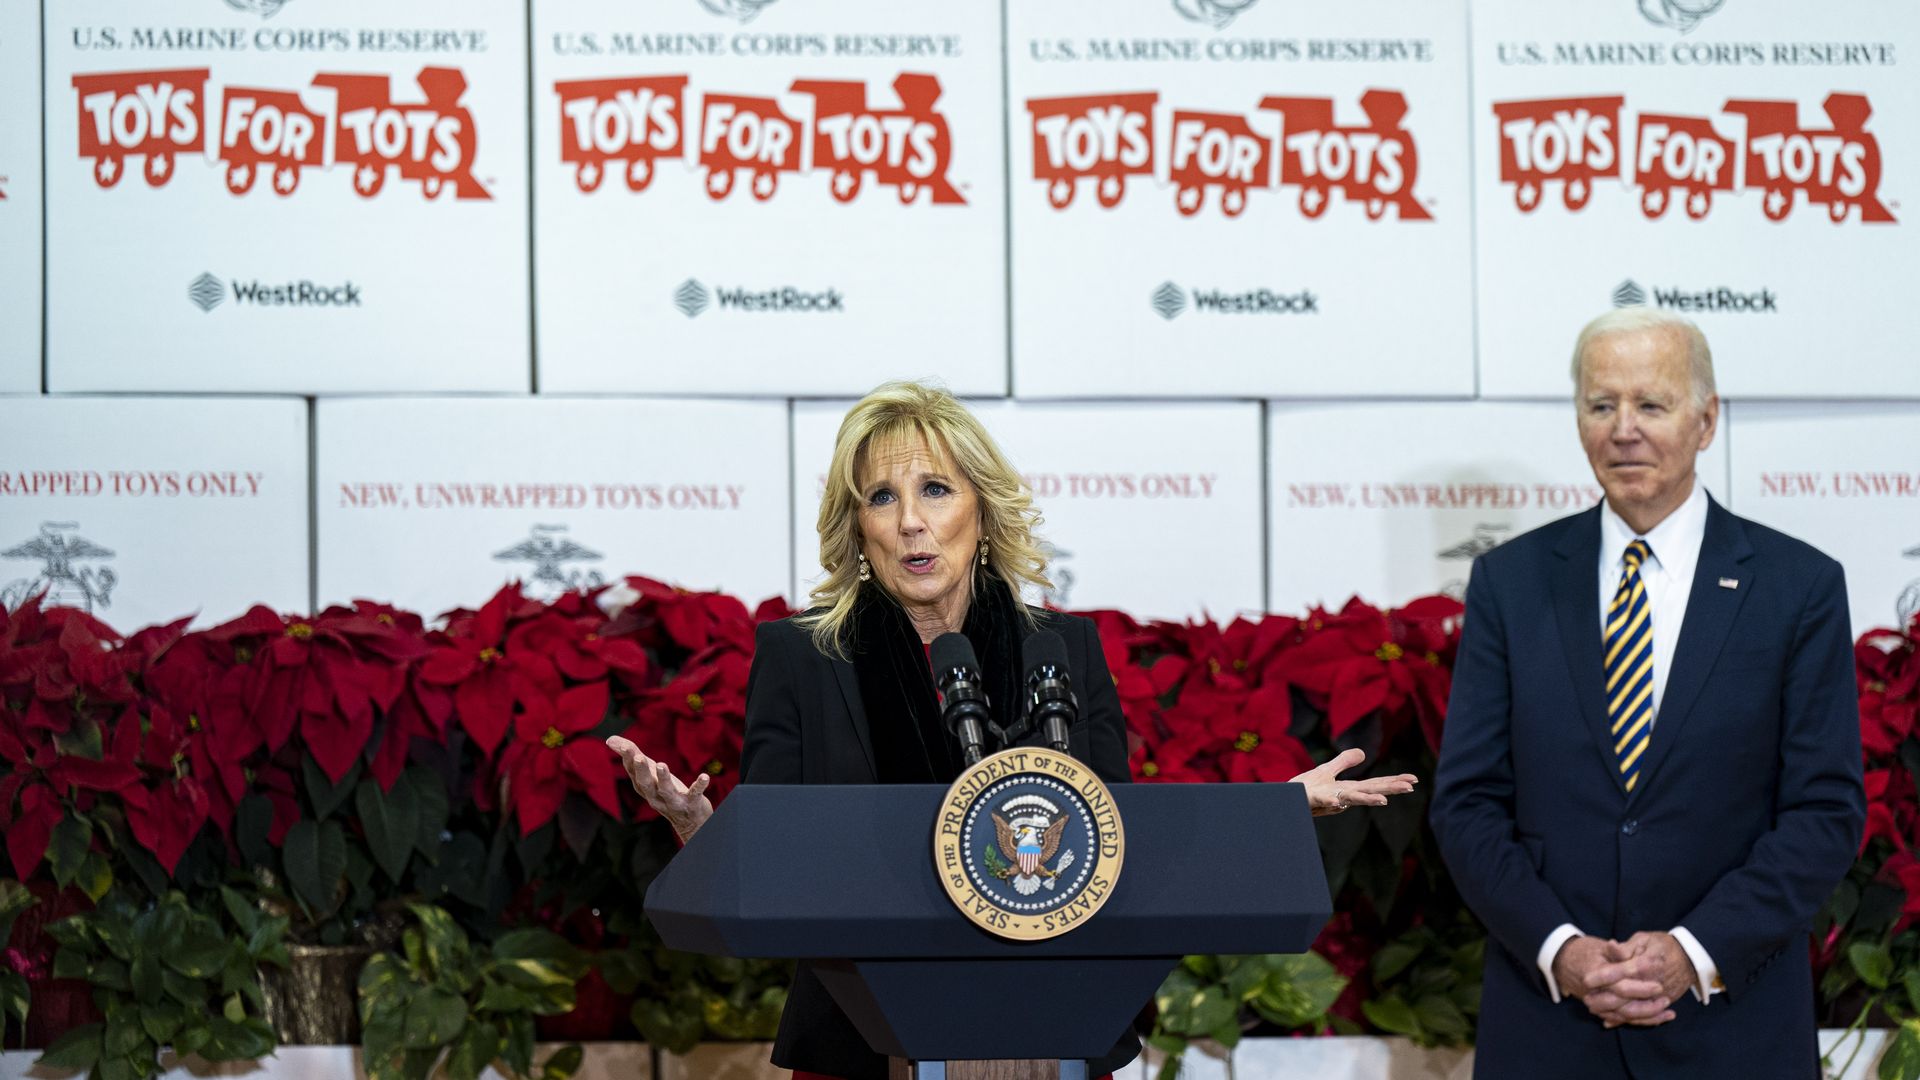 First Lady Jill Biden speaks at a Marine Corps Reserve Toys for Tots event with US President Joe Biden, right, at Joint Base Myer-Henderson Hall in Arlington, Virginia, US, on Monday, Dec. 12.